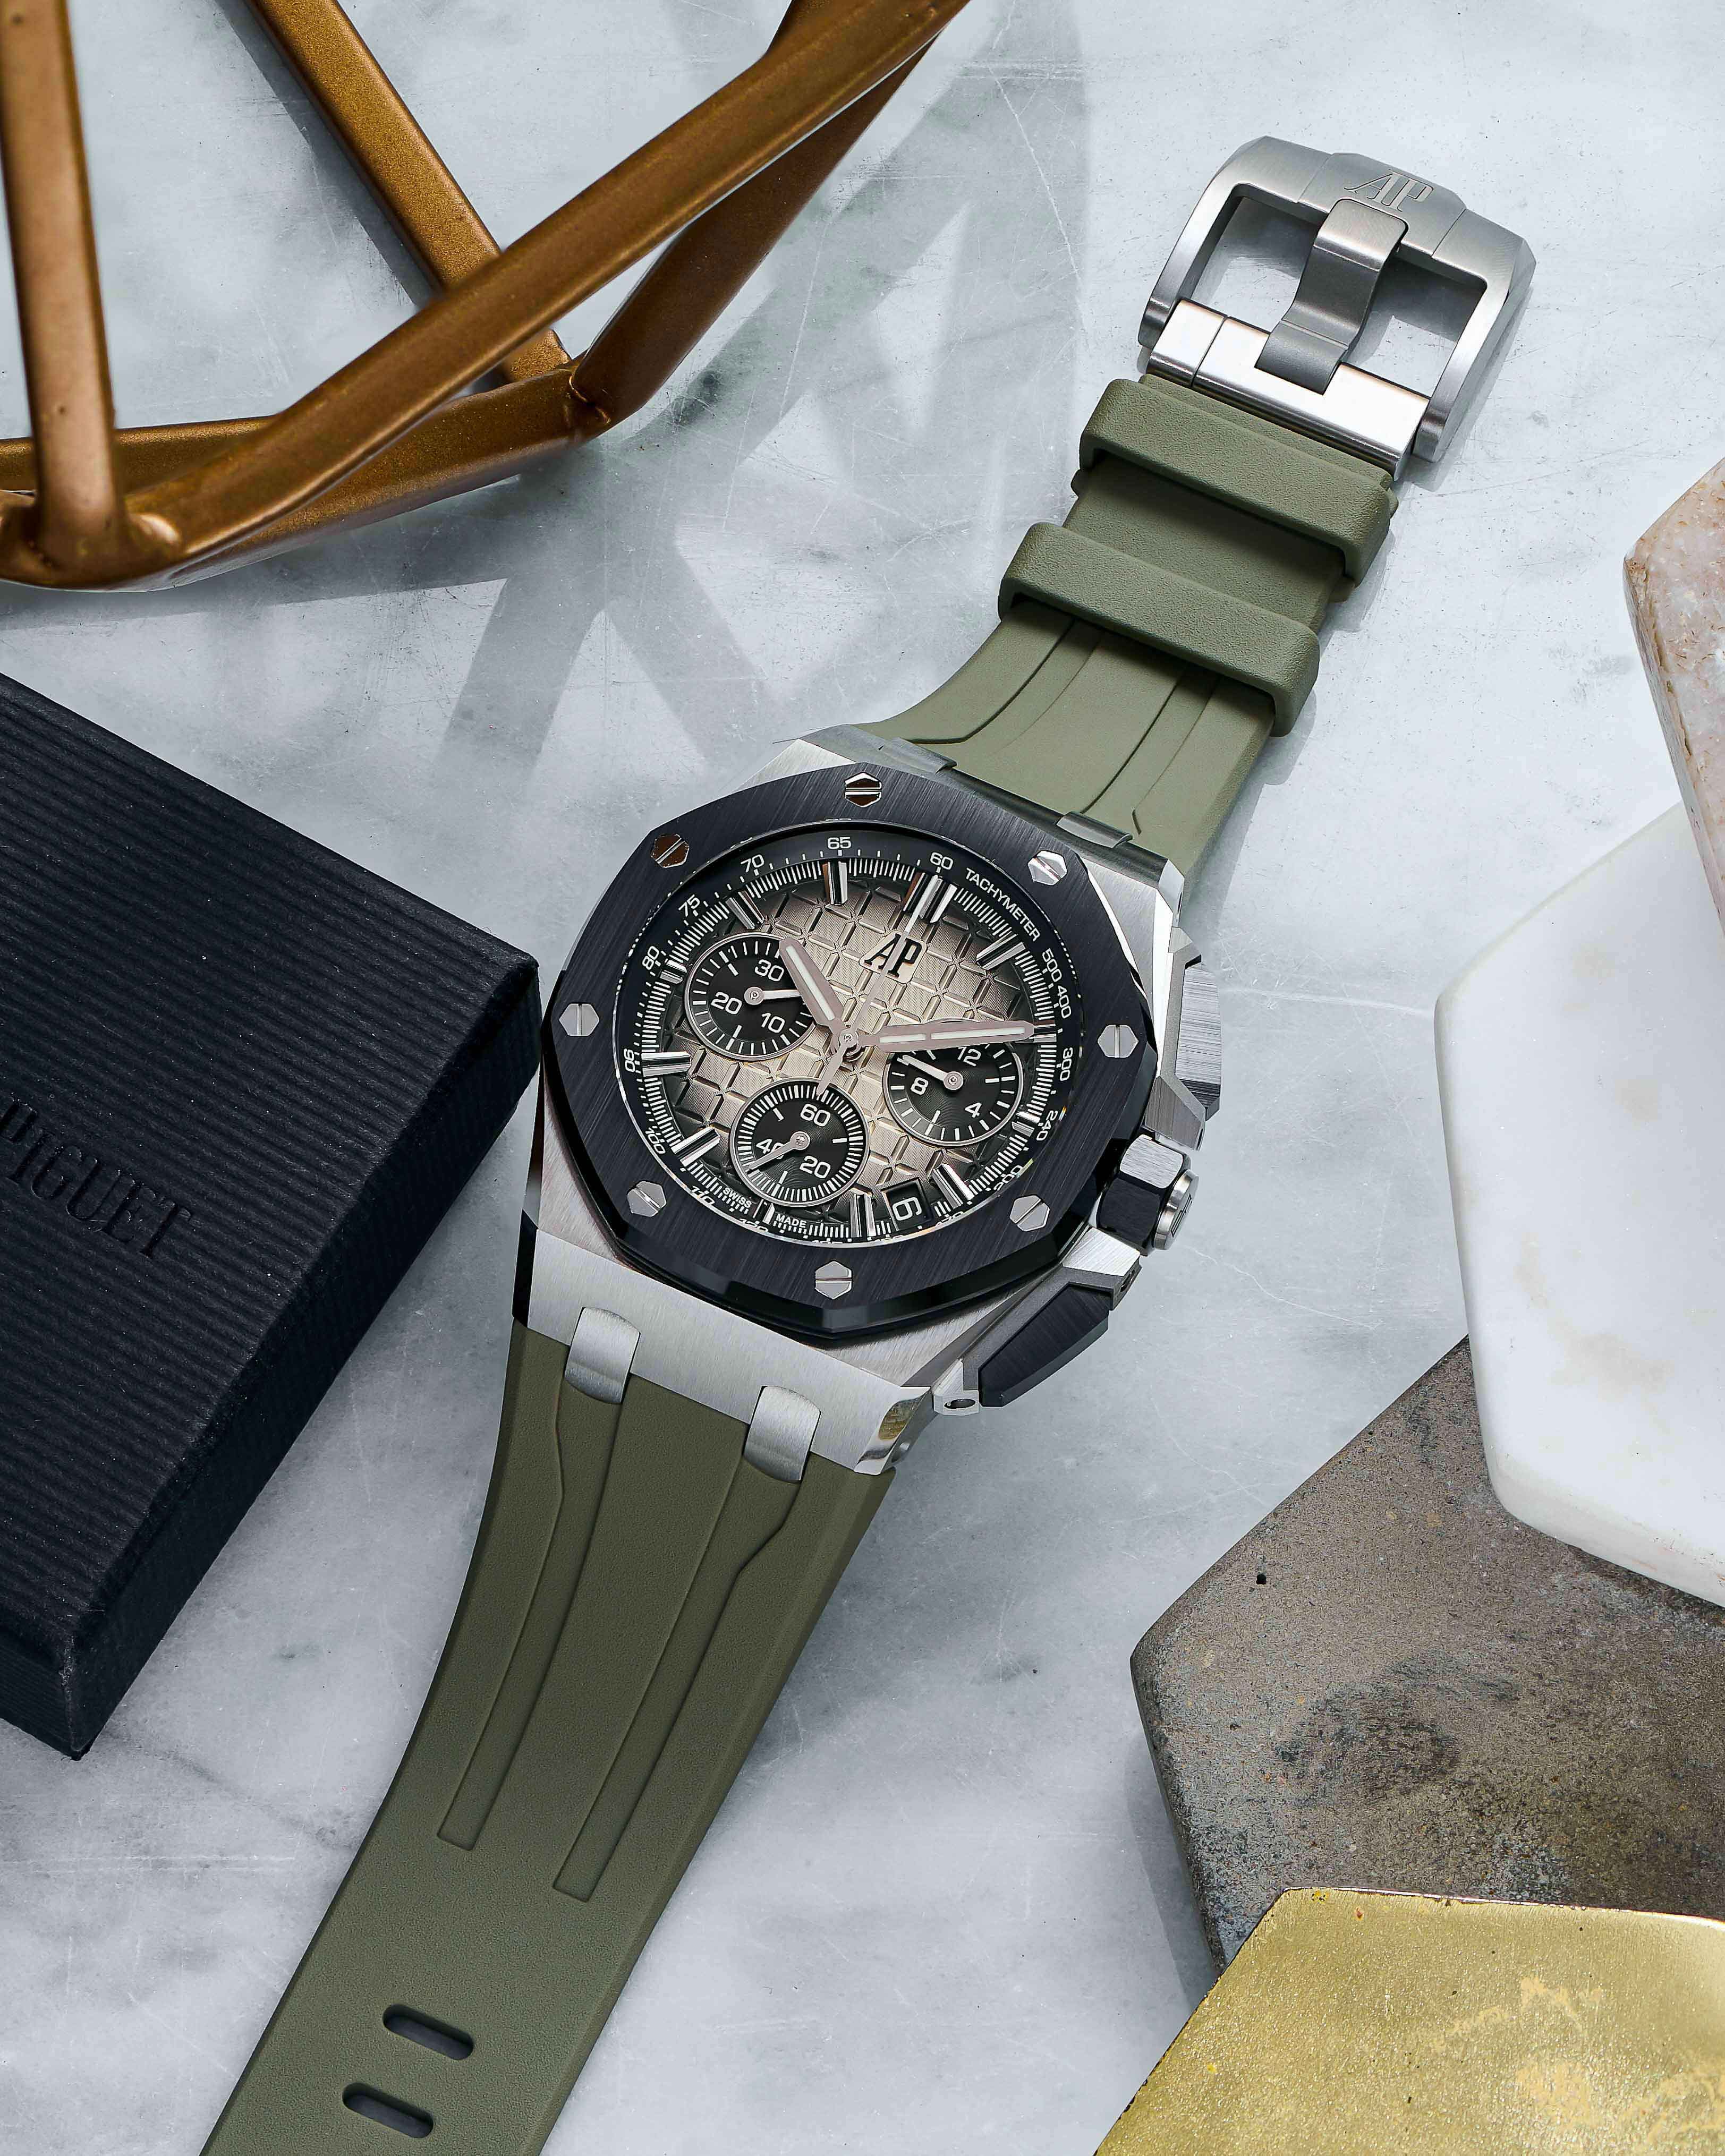 A Black Bezel Timepiece on a Rubber Green Strap Lays Across a Marble Tabletop.